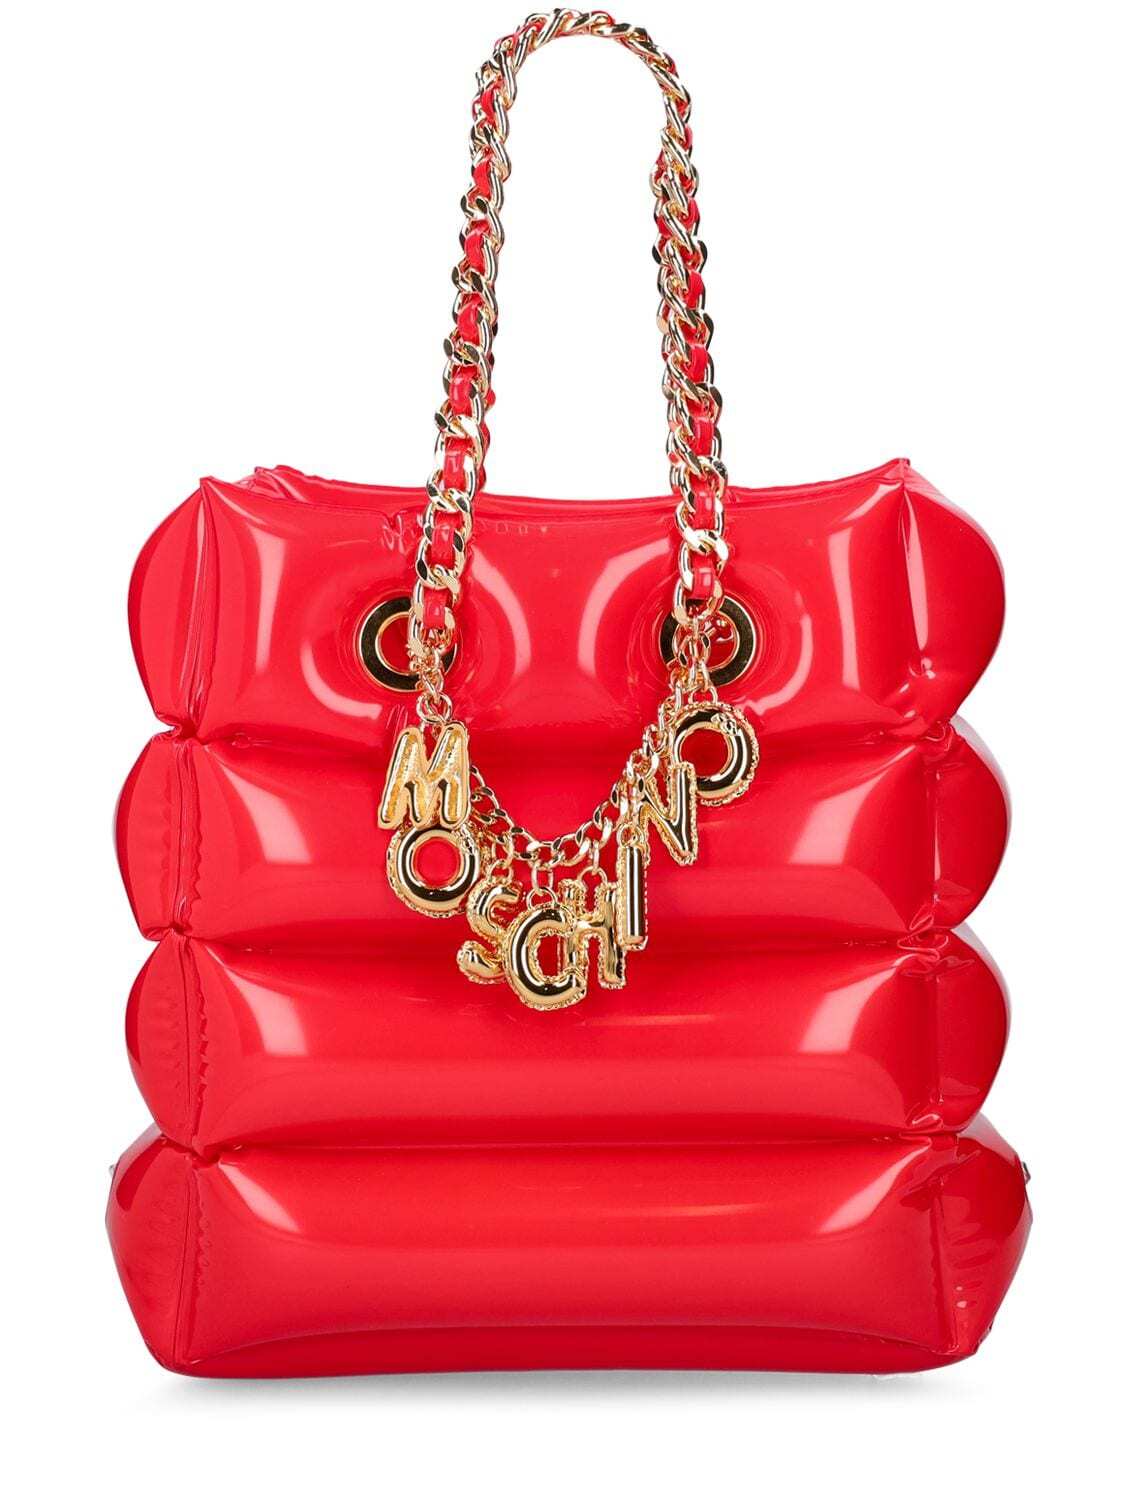 MOSCHINO Padded Chain Logo Tote Bag in red